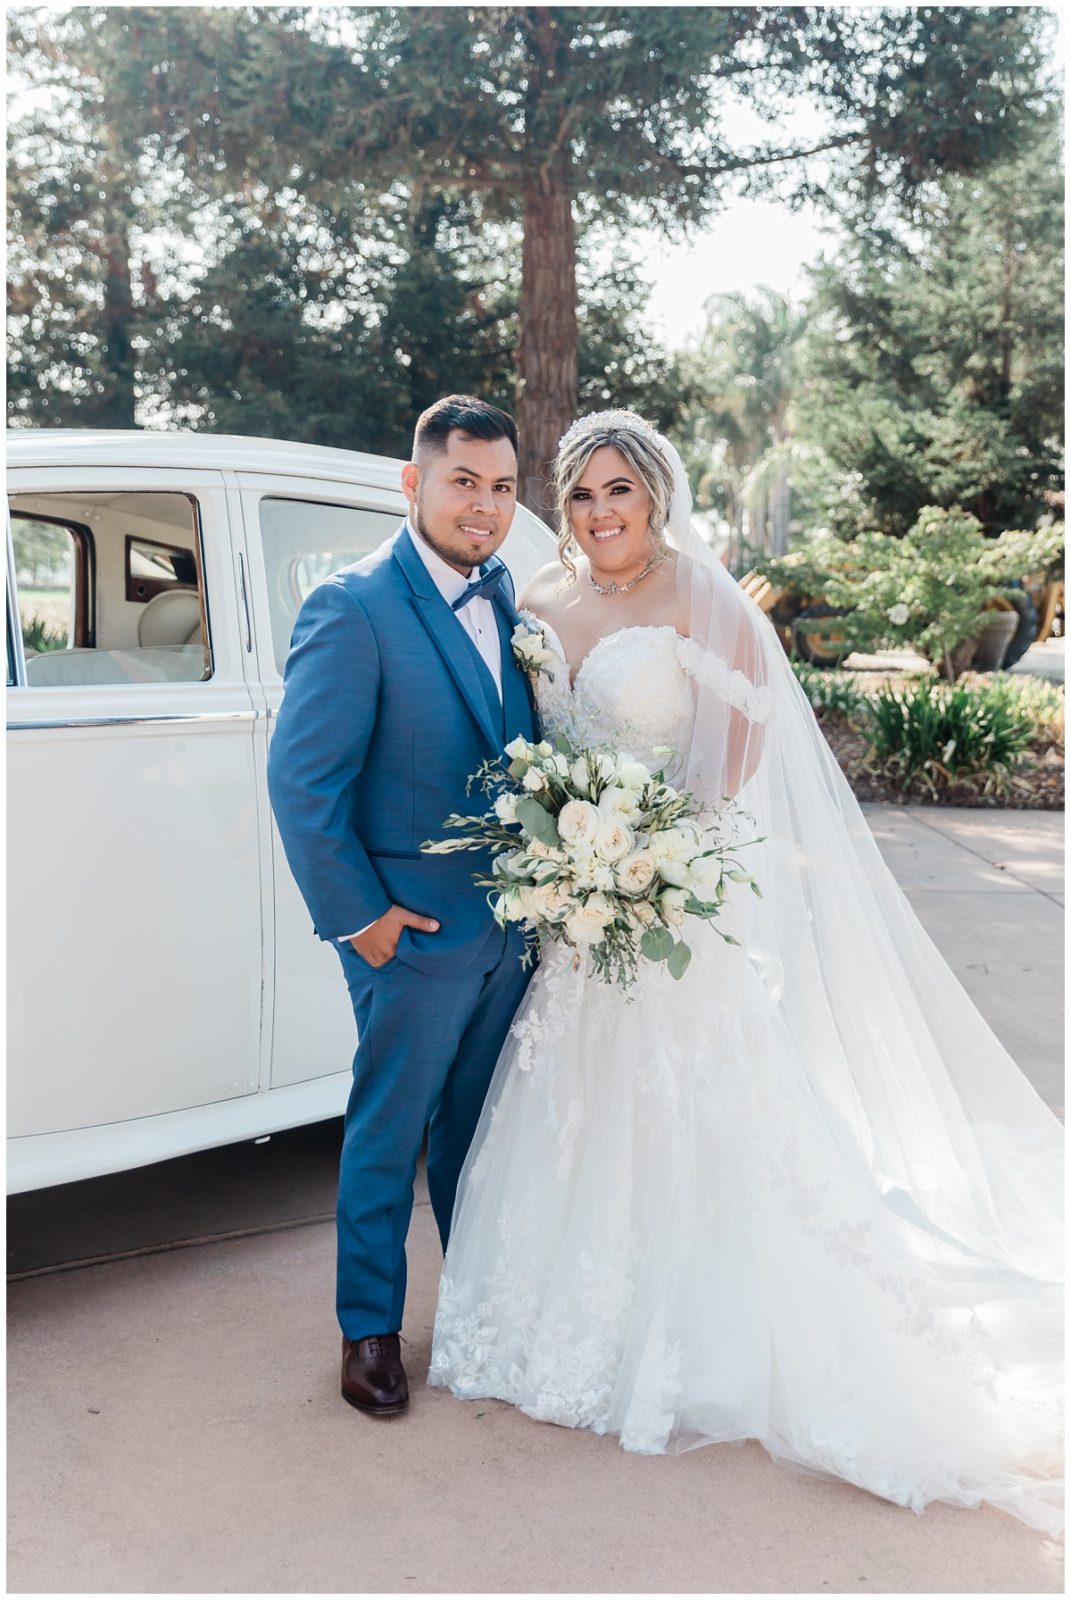 Bride and Groom Portraits with Vintage Car